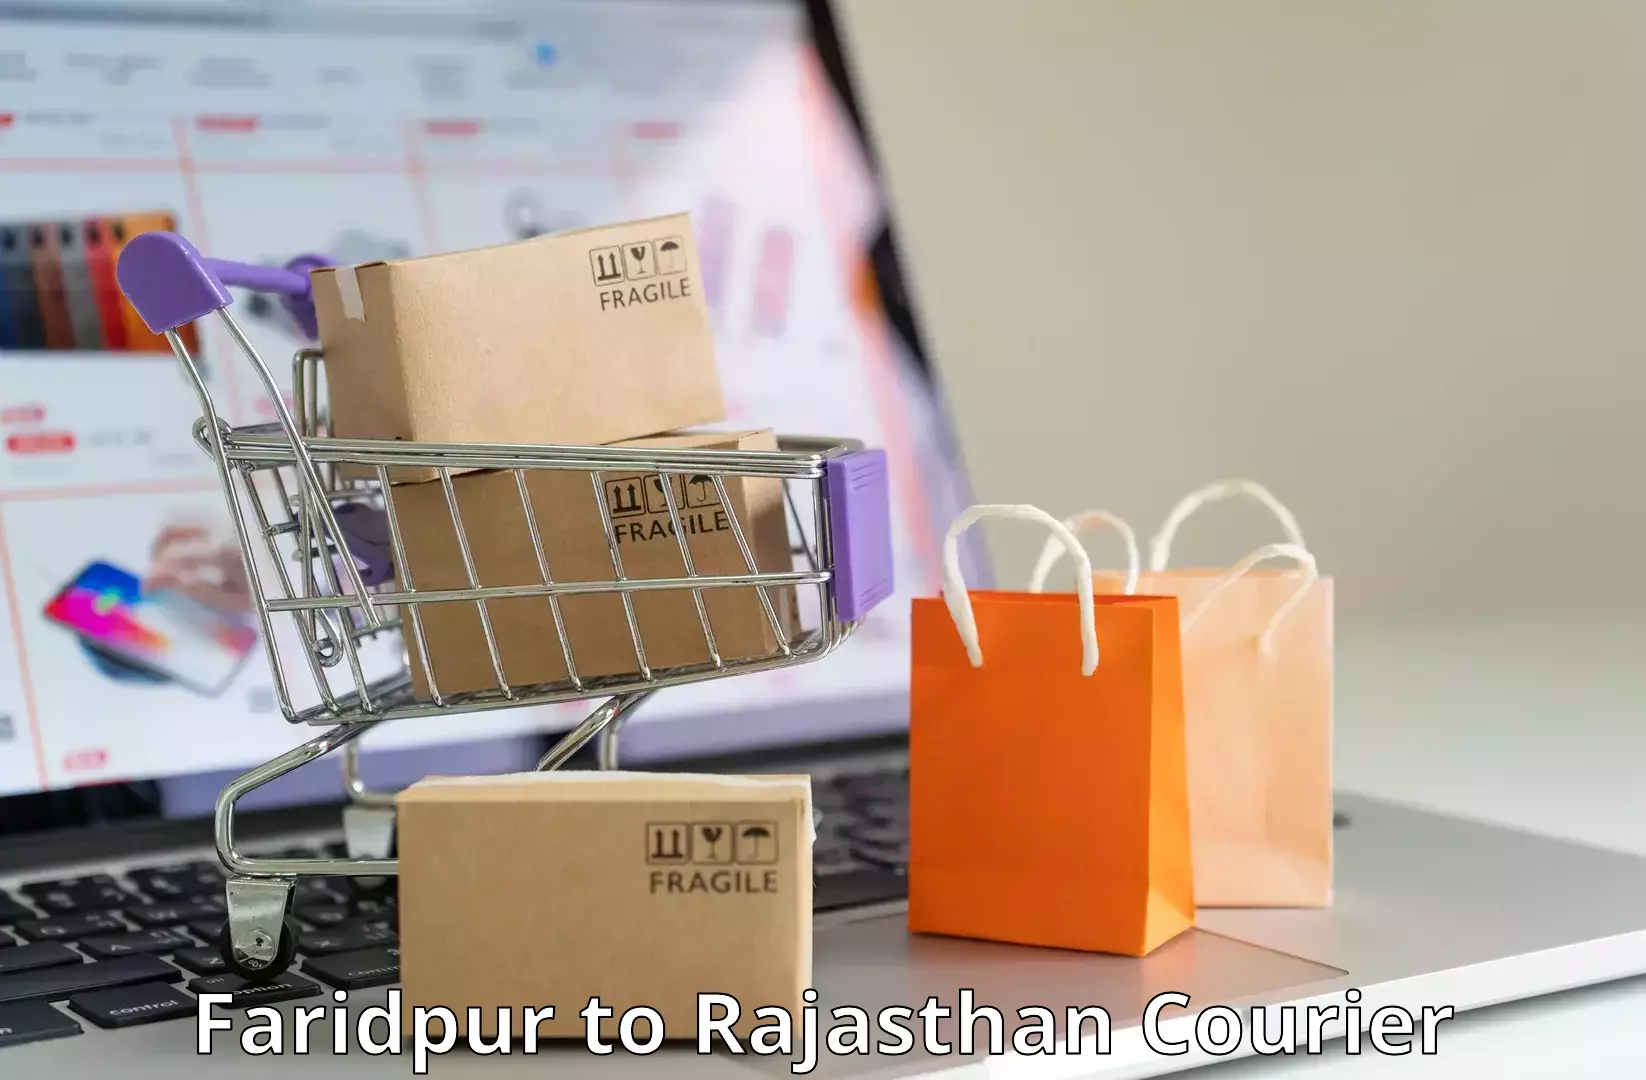 Digital courier platforms in Faridpur to Ajmer